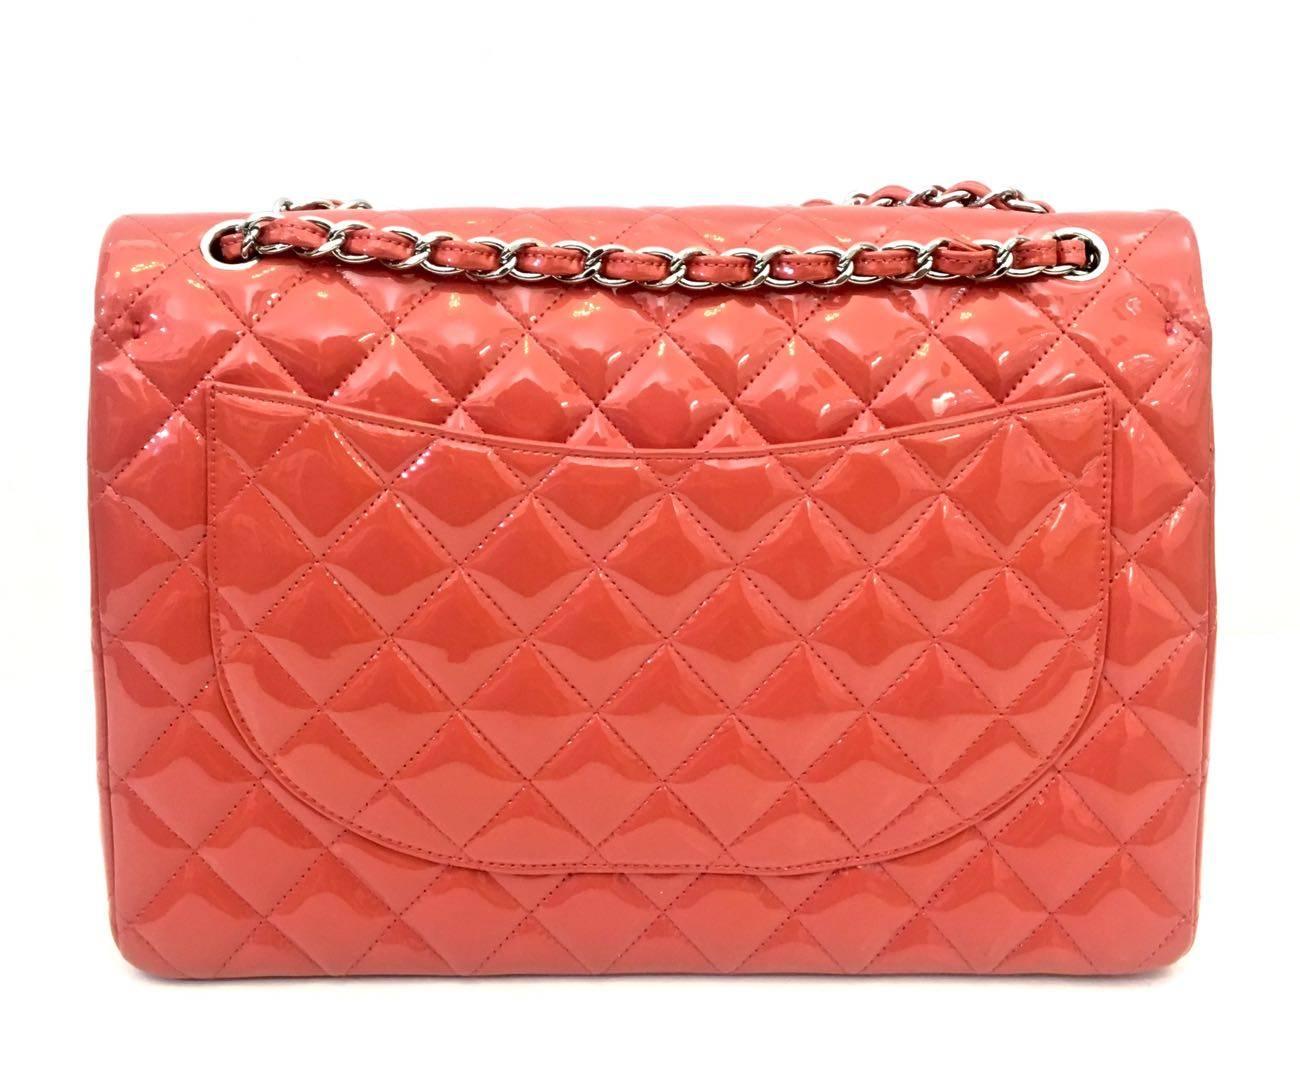 Chanel Bag Maxi Jumbo Coral Vernis Leather 
Hdw Silver. Year 2011- 2012. Double flap bag in timeless. Rear exterior slot pocket. 
Dimensions 32.0 x 22.0 x 10.0 cm. Signature interior pockets. Stamp inside the bag. Serial number on interior corner.